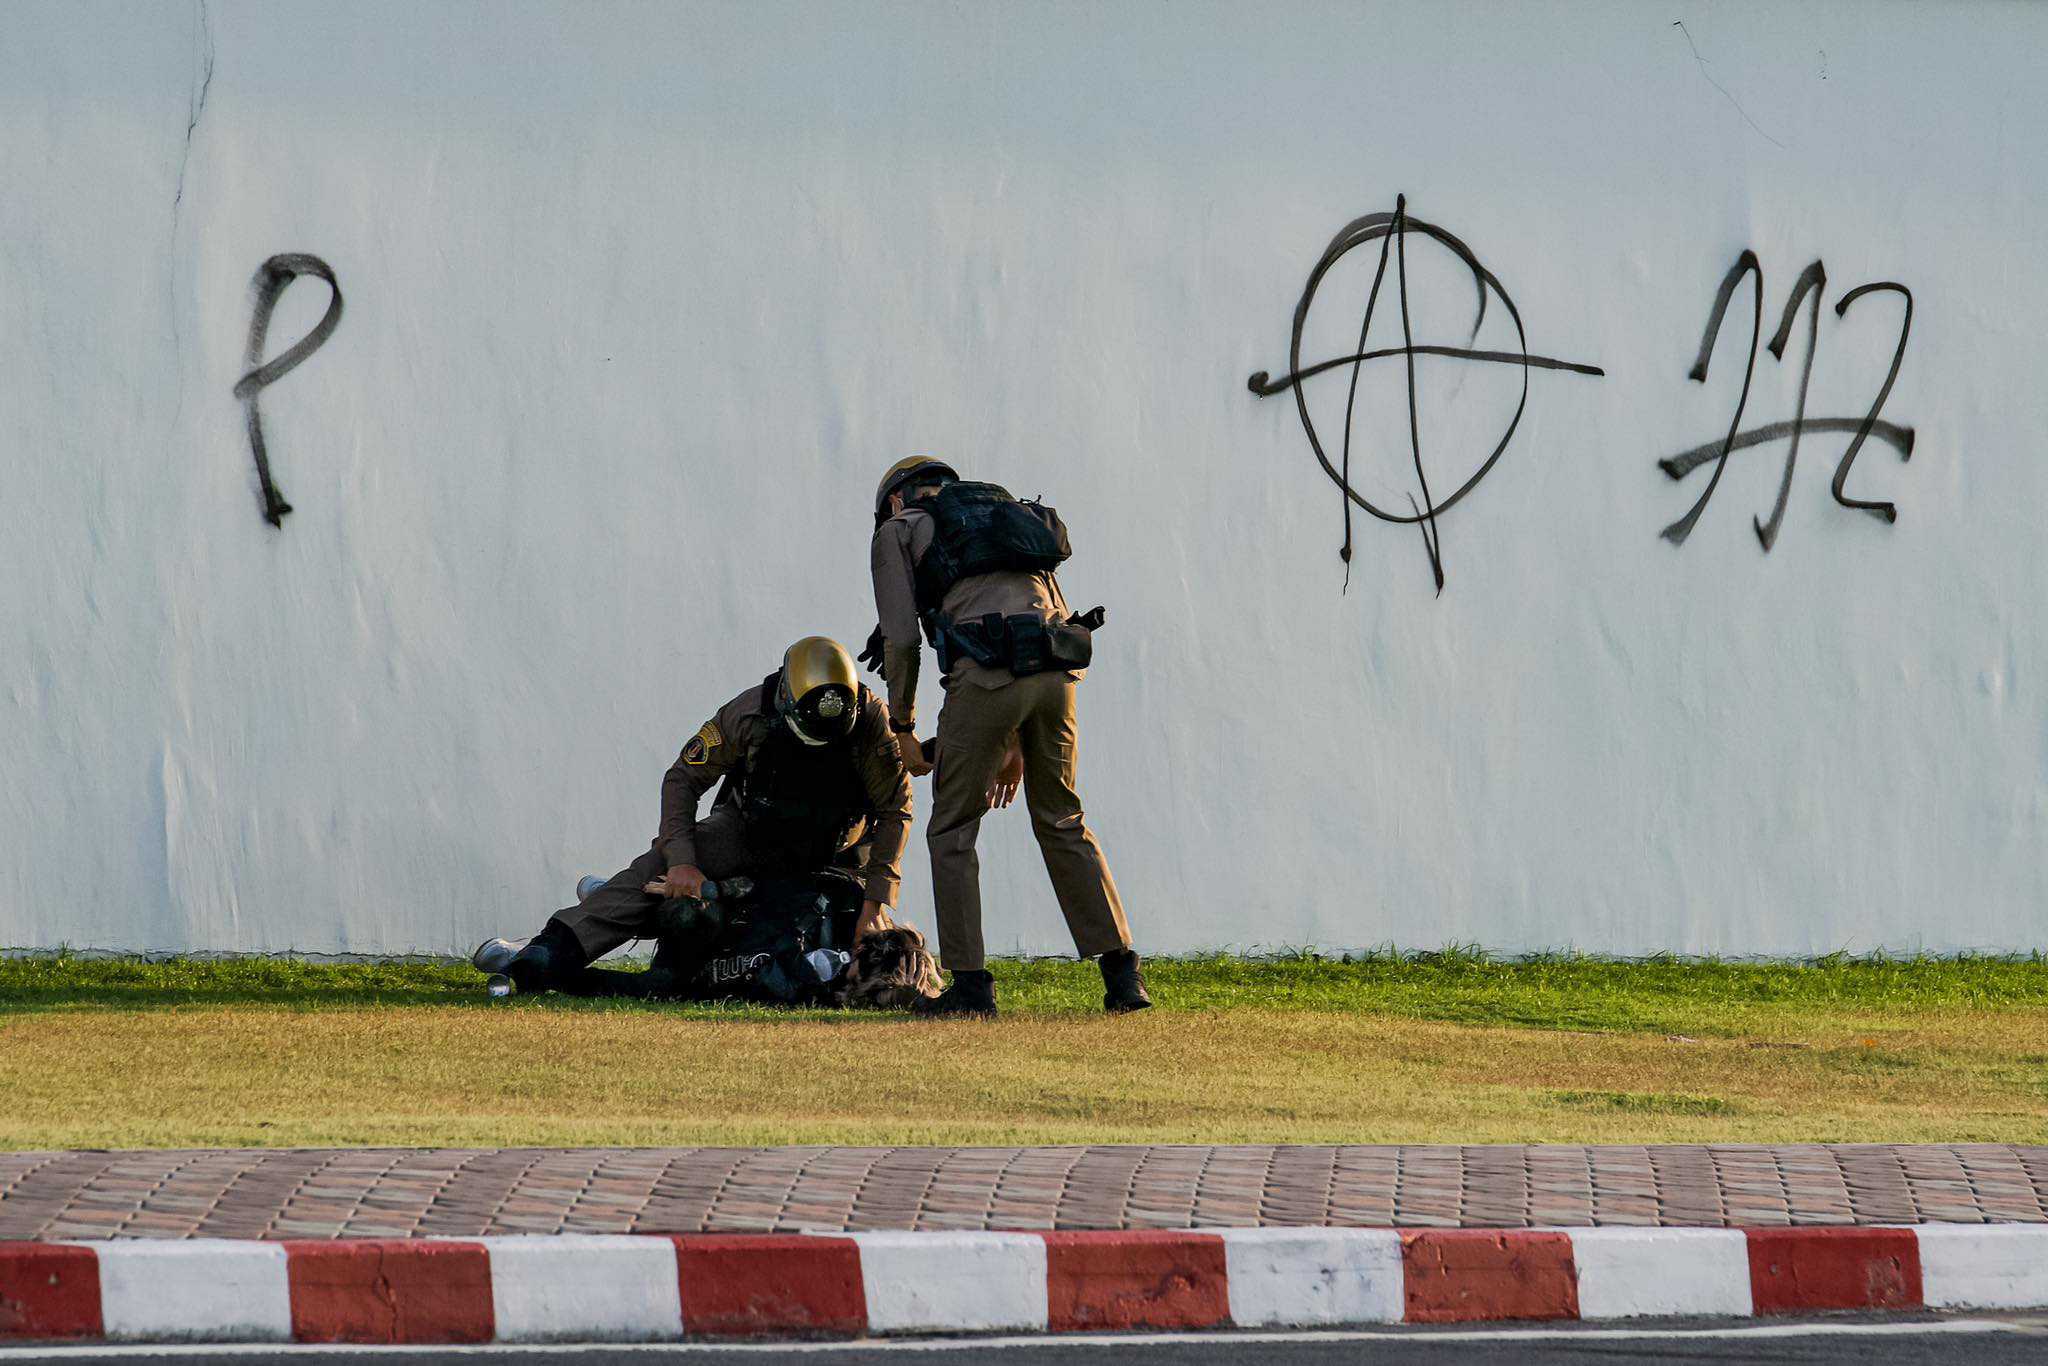 Earn, the Grand Palace graffiti artist, was tackled to the ground during his arrest. A police officer placed his knee on Earn's head even though he was not resisting arrest, said Thai Lawyers for Human Rights. Photo: Ginger Cat 